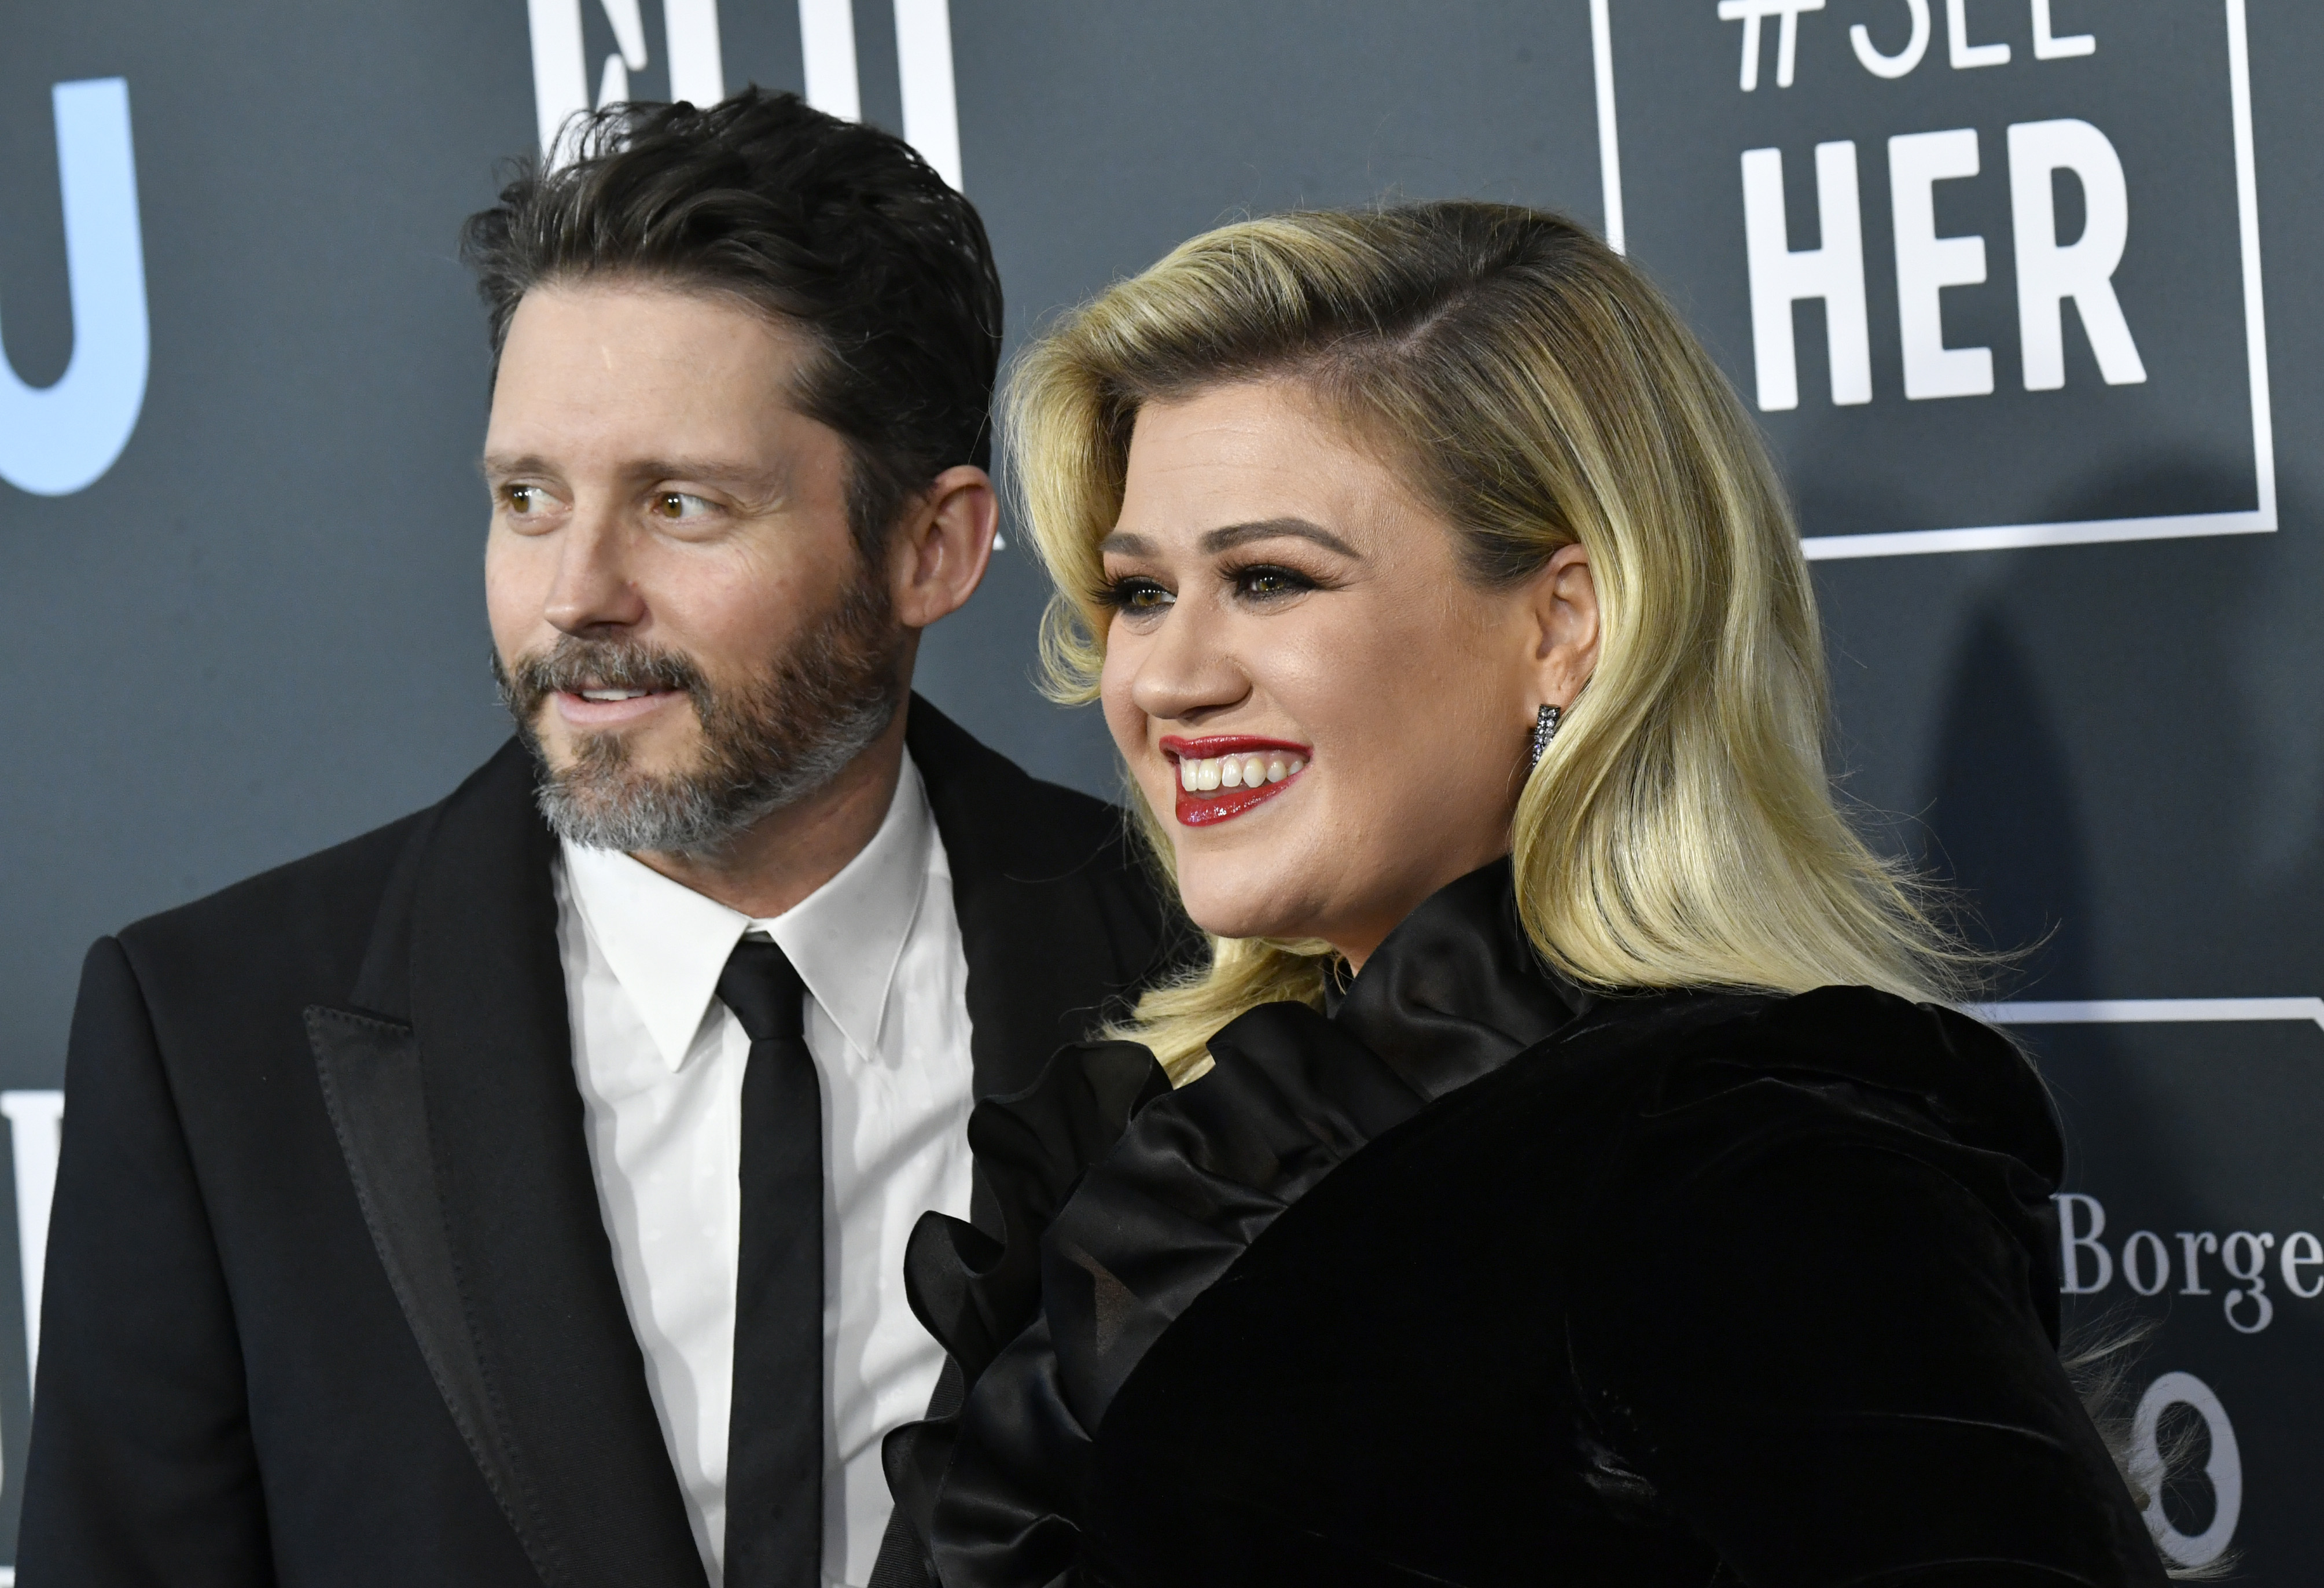 Kelly Clarkson Announces Divorce From Husband Of 7 Years National Globalnews Ca